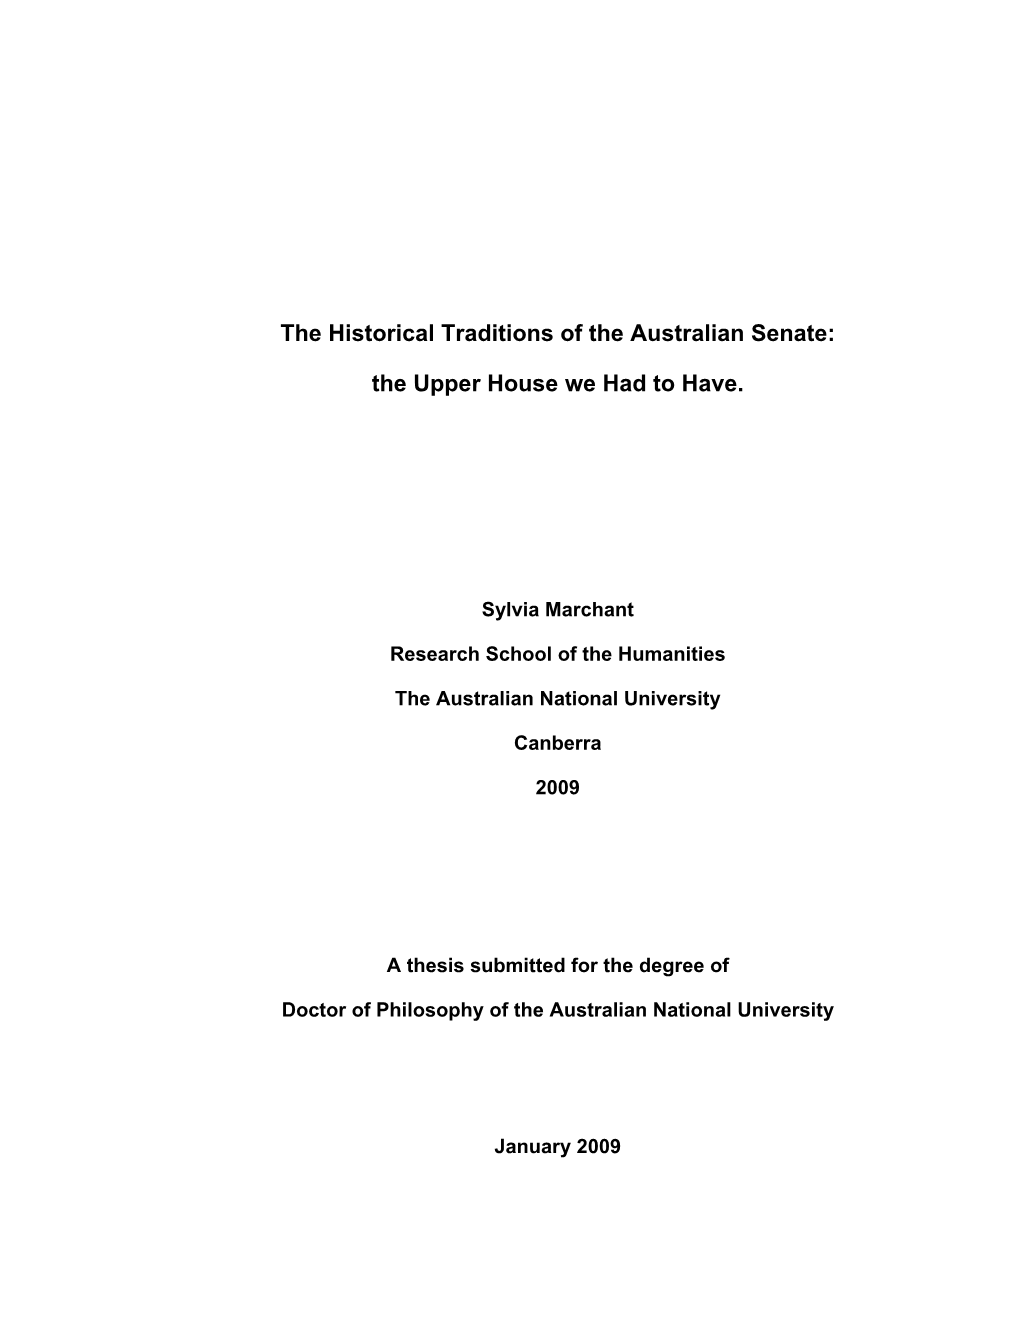 The Historical Traditions of the Australian Senate